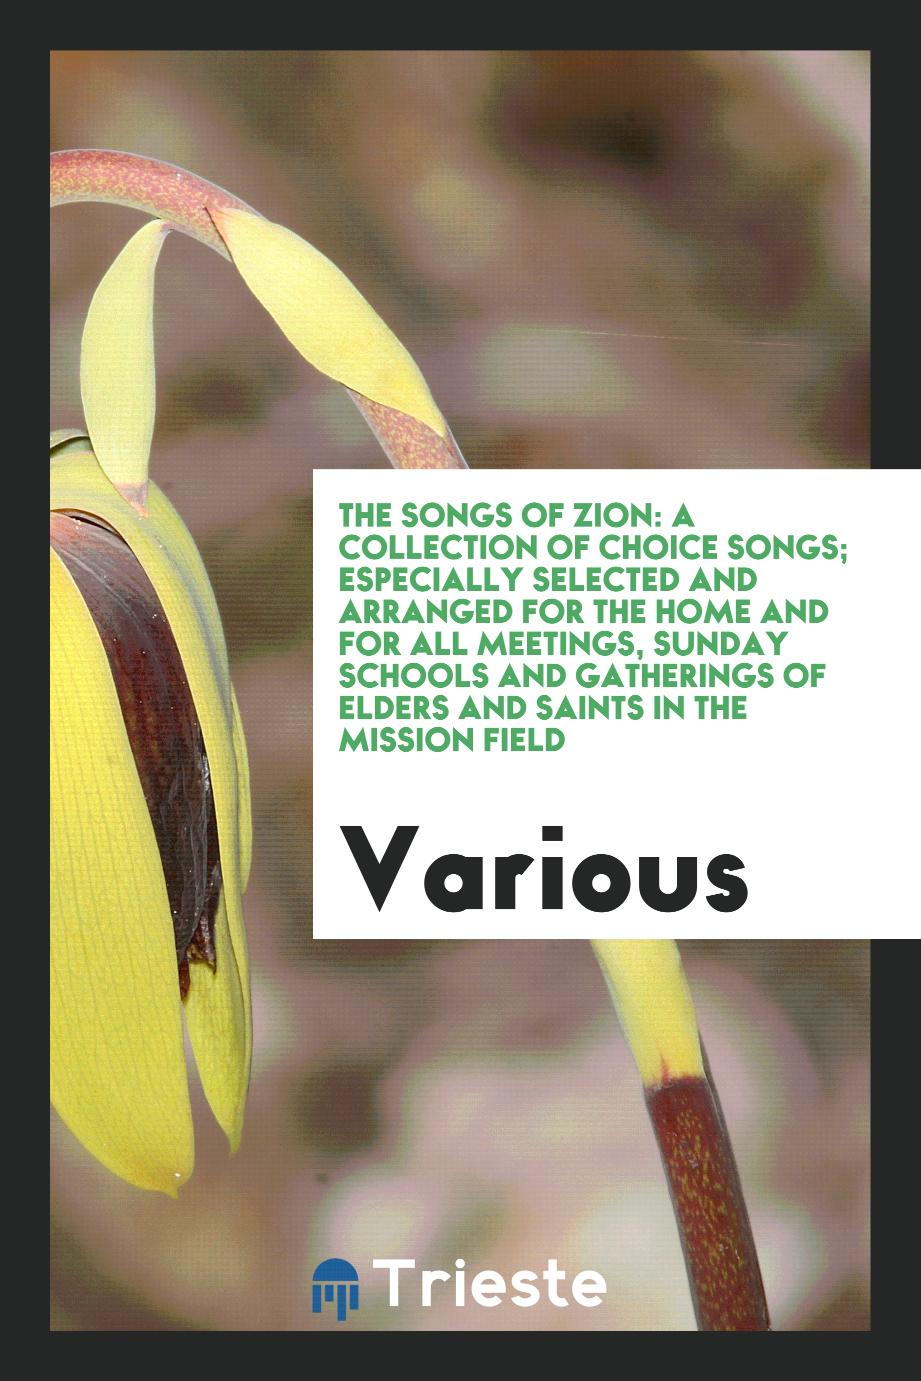 The Songs of Zion: A Collection of Choice Songs; Especially Selected and Arranged for the Home and for All Meetings, Sunday Schools and Gatherings of Elders and Saints in the Mission Field